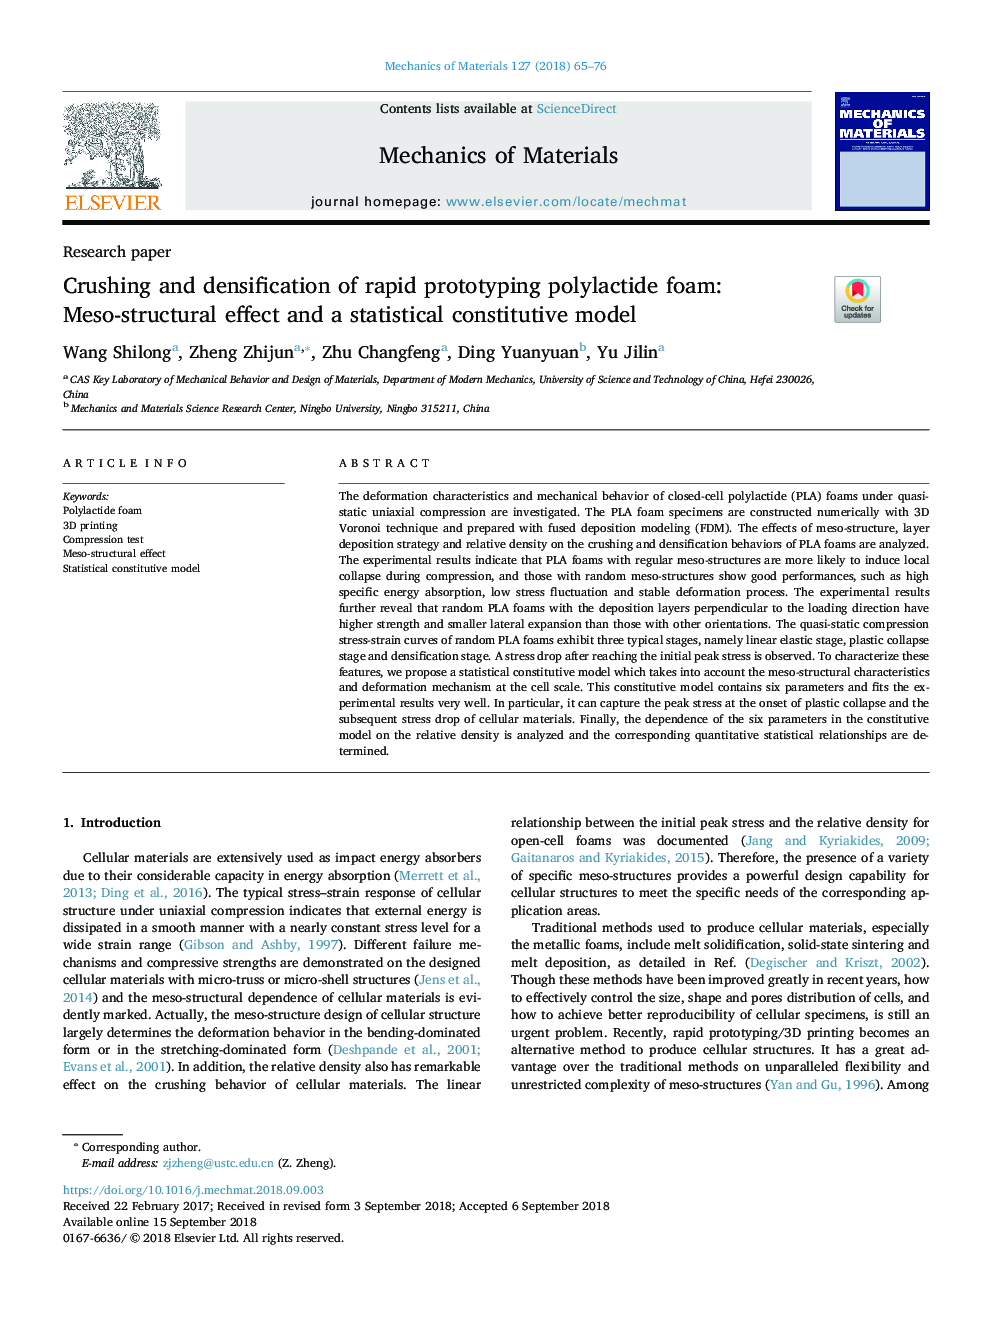 Crushing and densification of rapid prototyping polylactide foam: Meso-structural effect and a statistical constitutive model